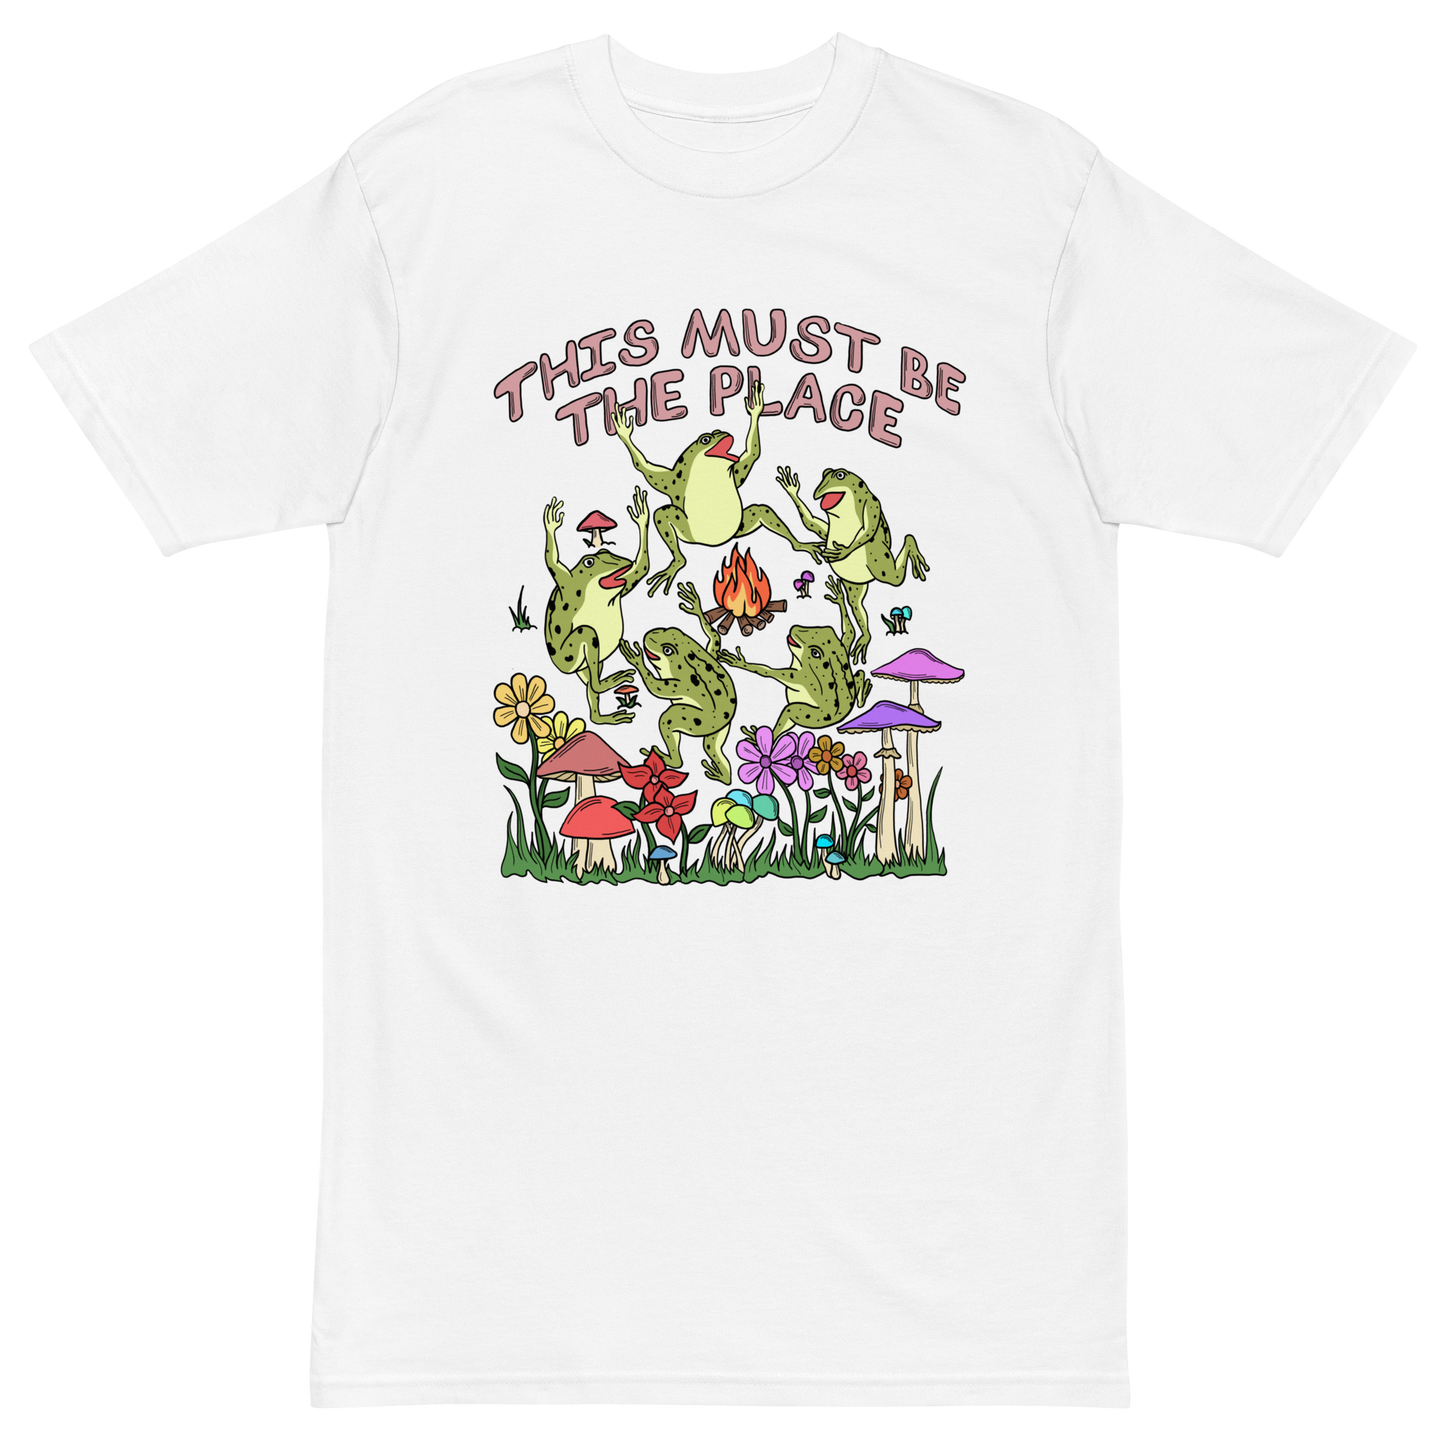 This Must Be The Place Premium Graphic Tee